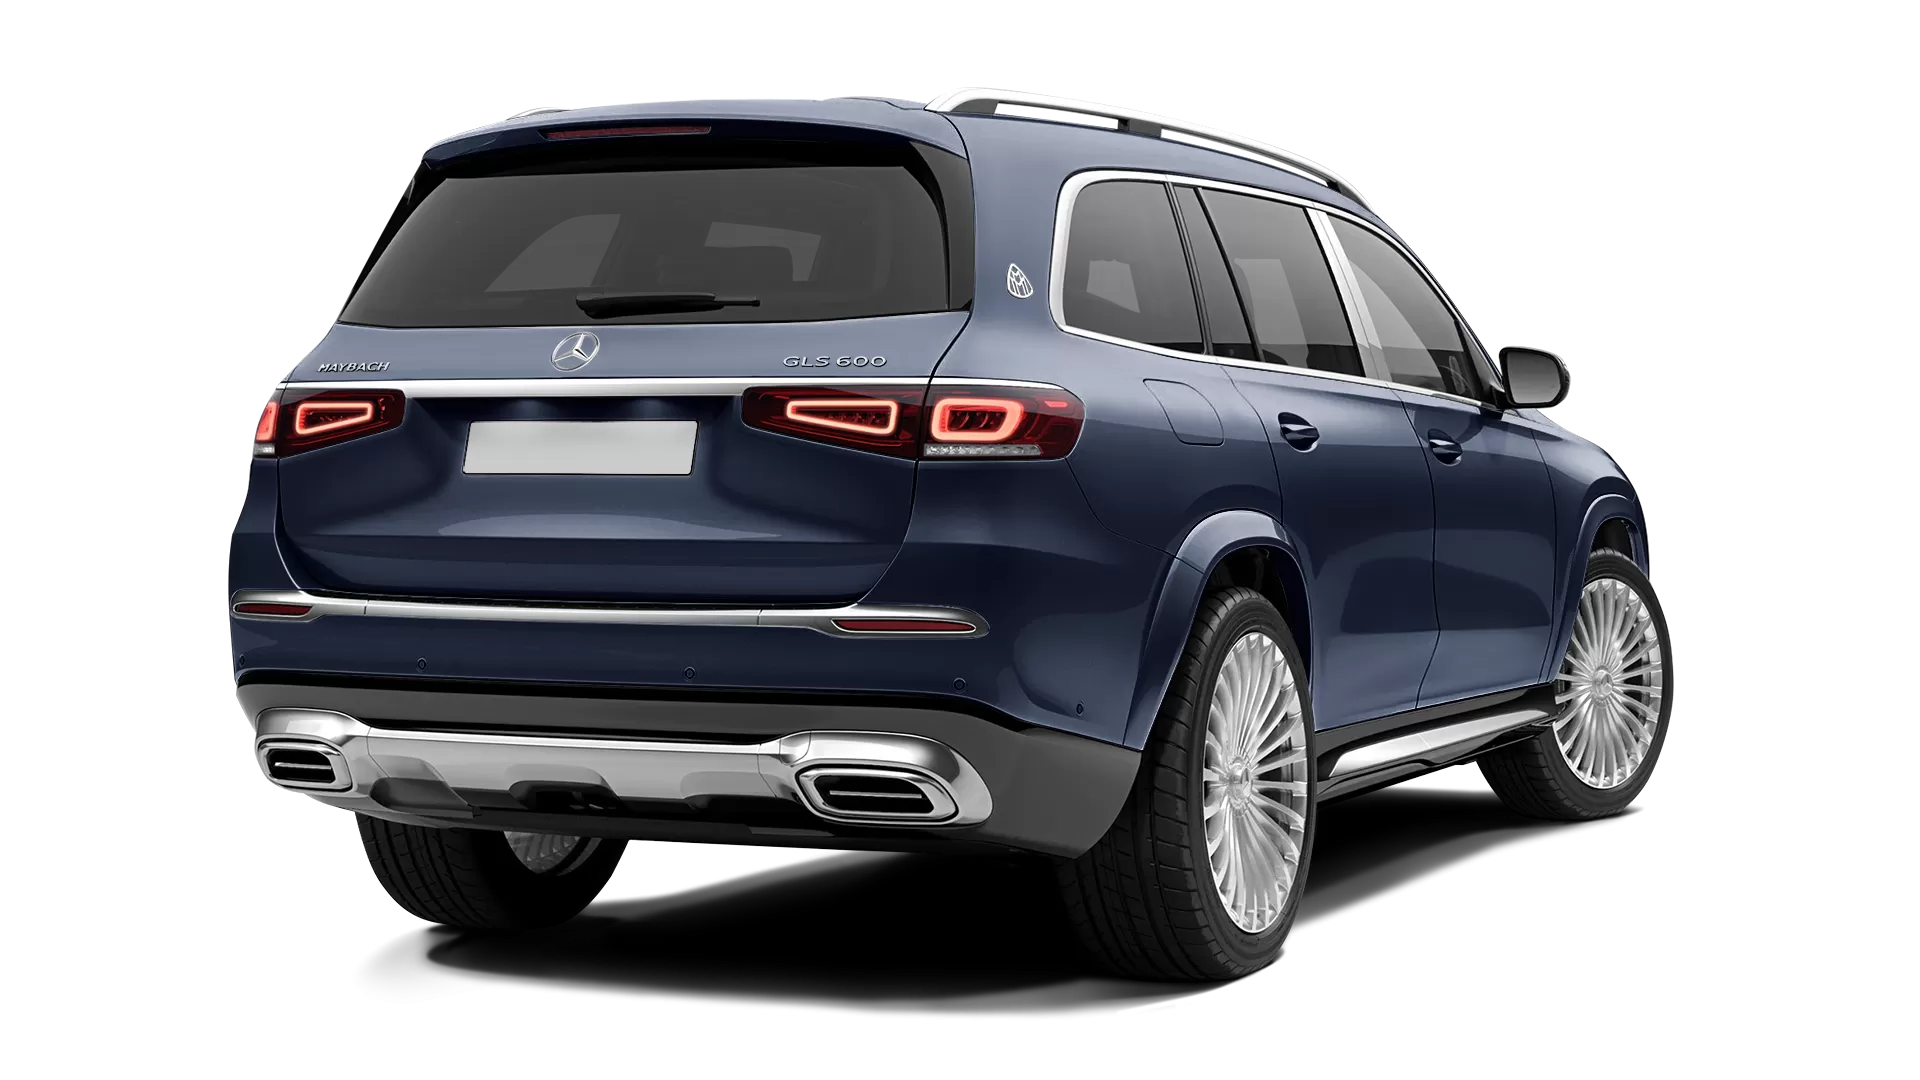 Mercedes Maybach GLS 600 stock rear view in Cavansite Blue color